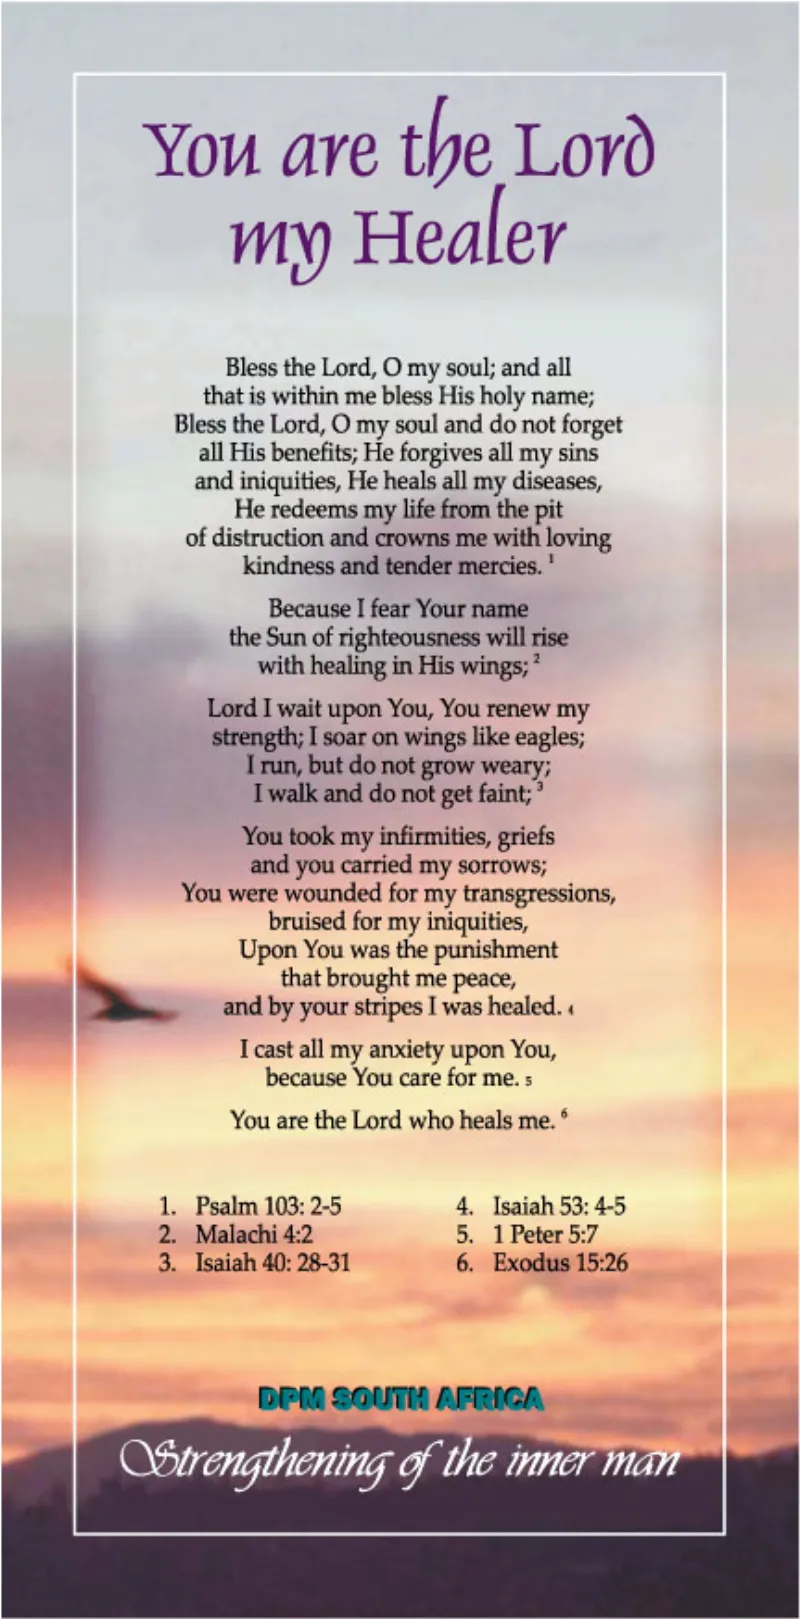 Proclamation - You are the Lord my Healer